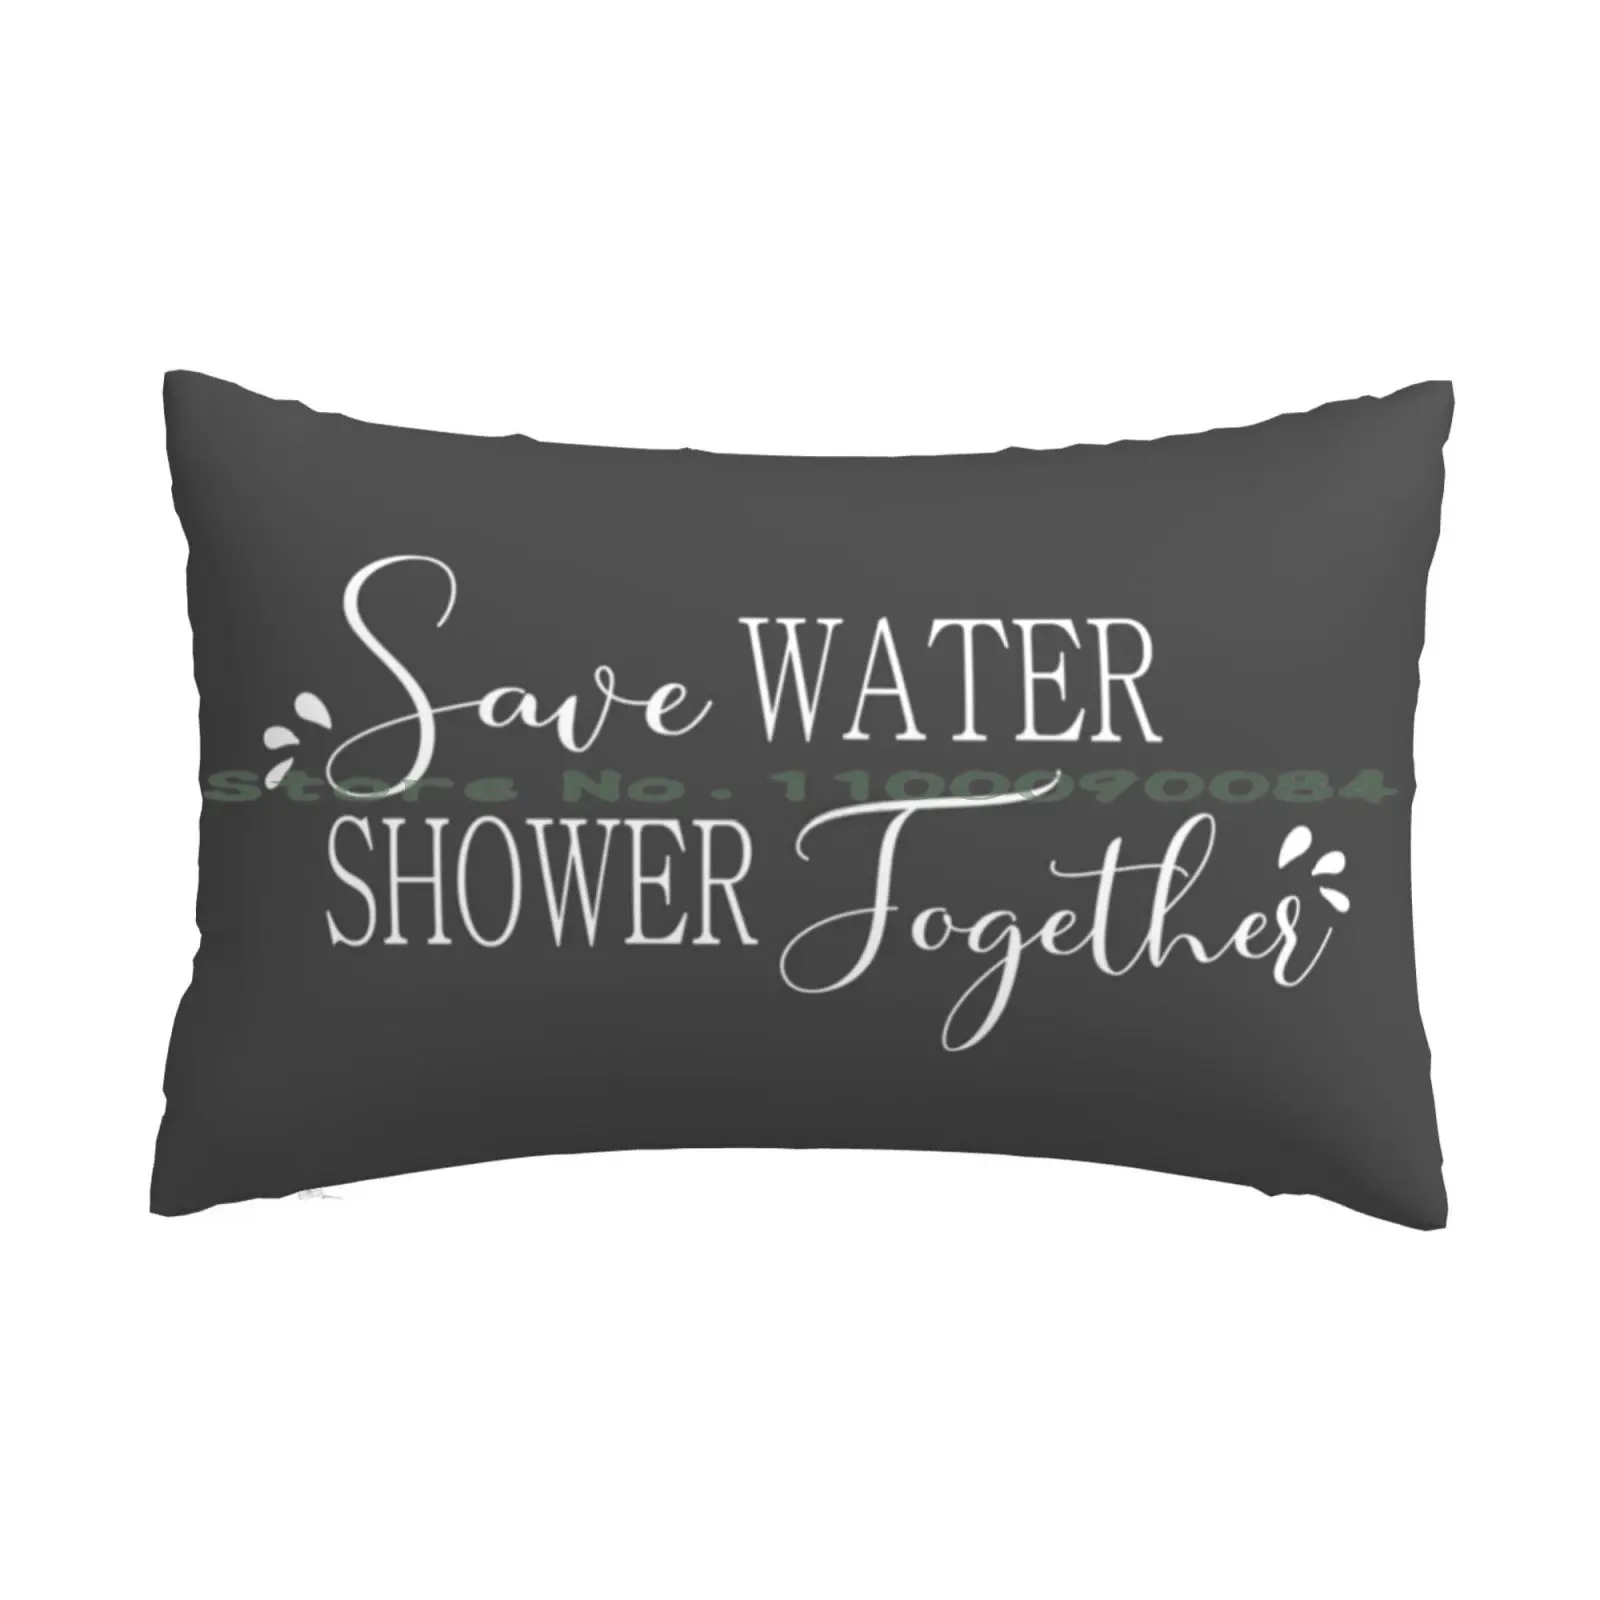 

Save Water Shower Together-Grey And White-Fun Shower Curtain Pillow Case 20x30 50*75 Sofa Bedroom Get Shower Together